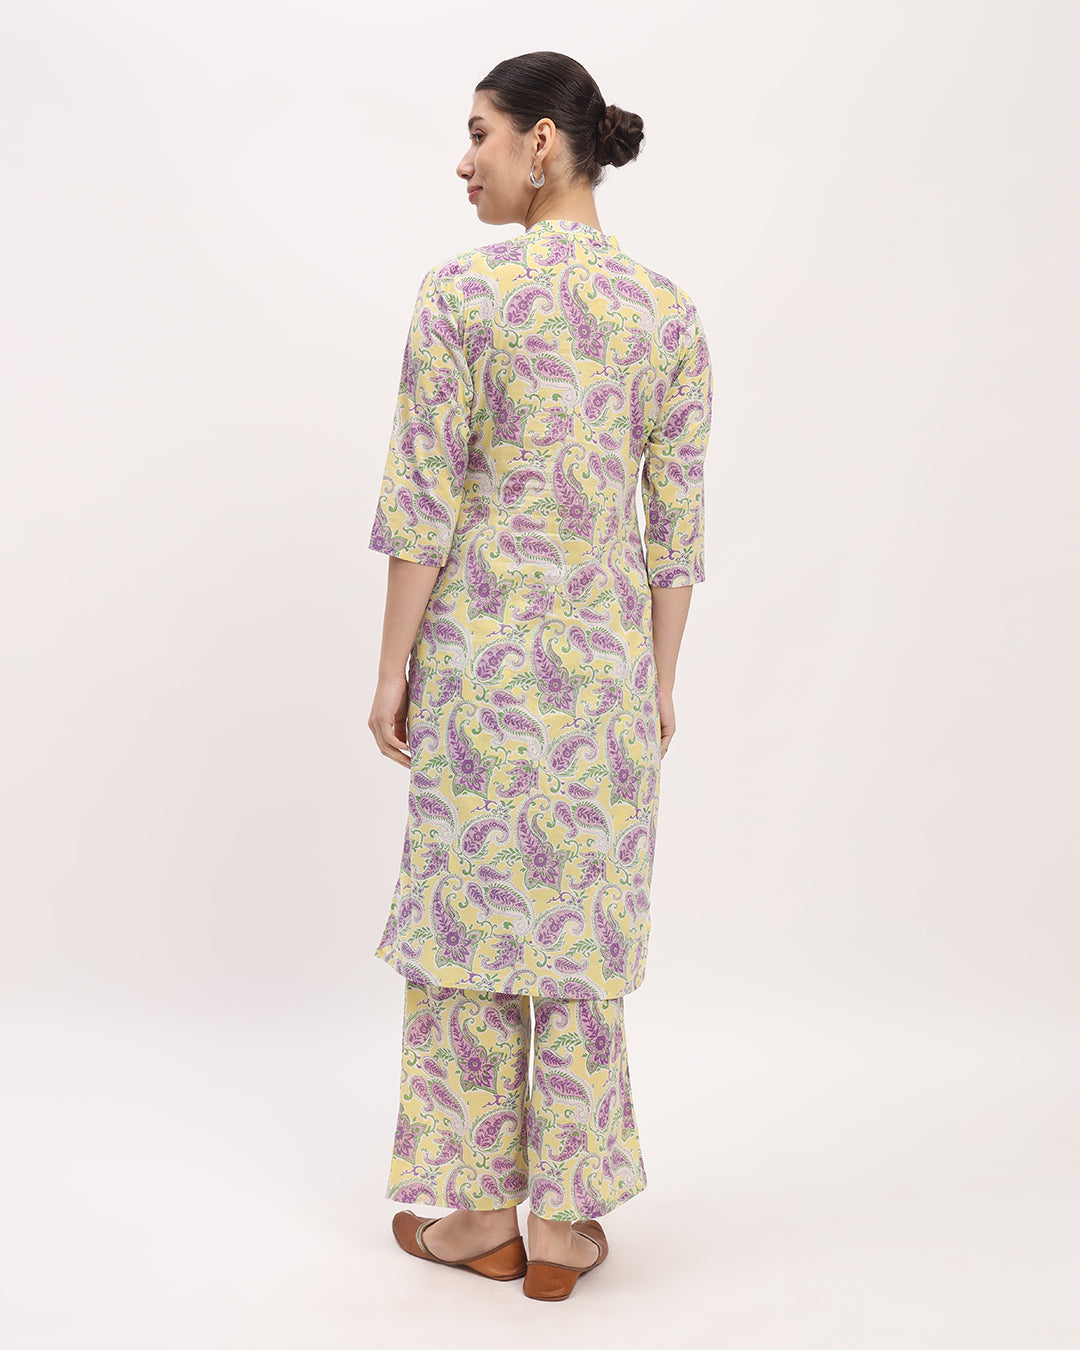 Combo: Lavender Paisley & Blue Starry High-Low Printed Kurta (Without Bottoms)